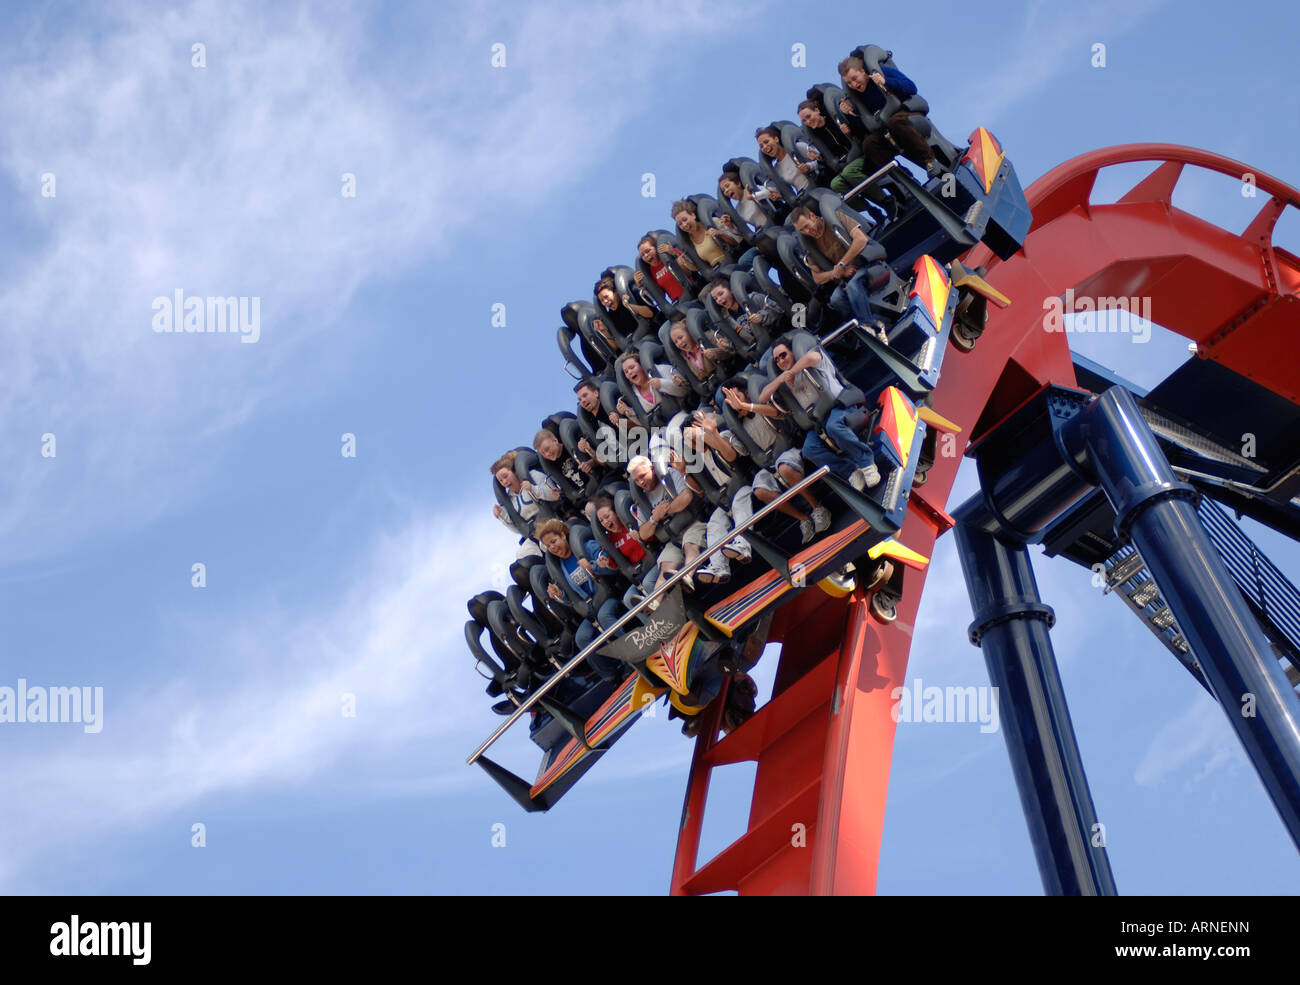 The Shiekra rollercoaster with thrill seekers aboard at the top of Vertical Drop at Busch Gardens, Tampa Florida, USA Stock Photo